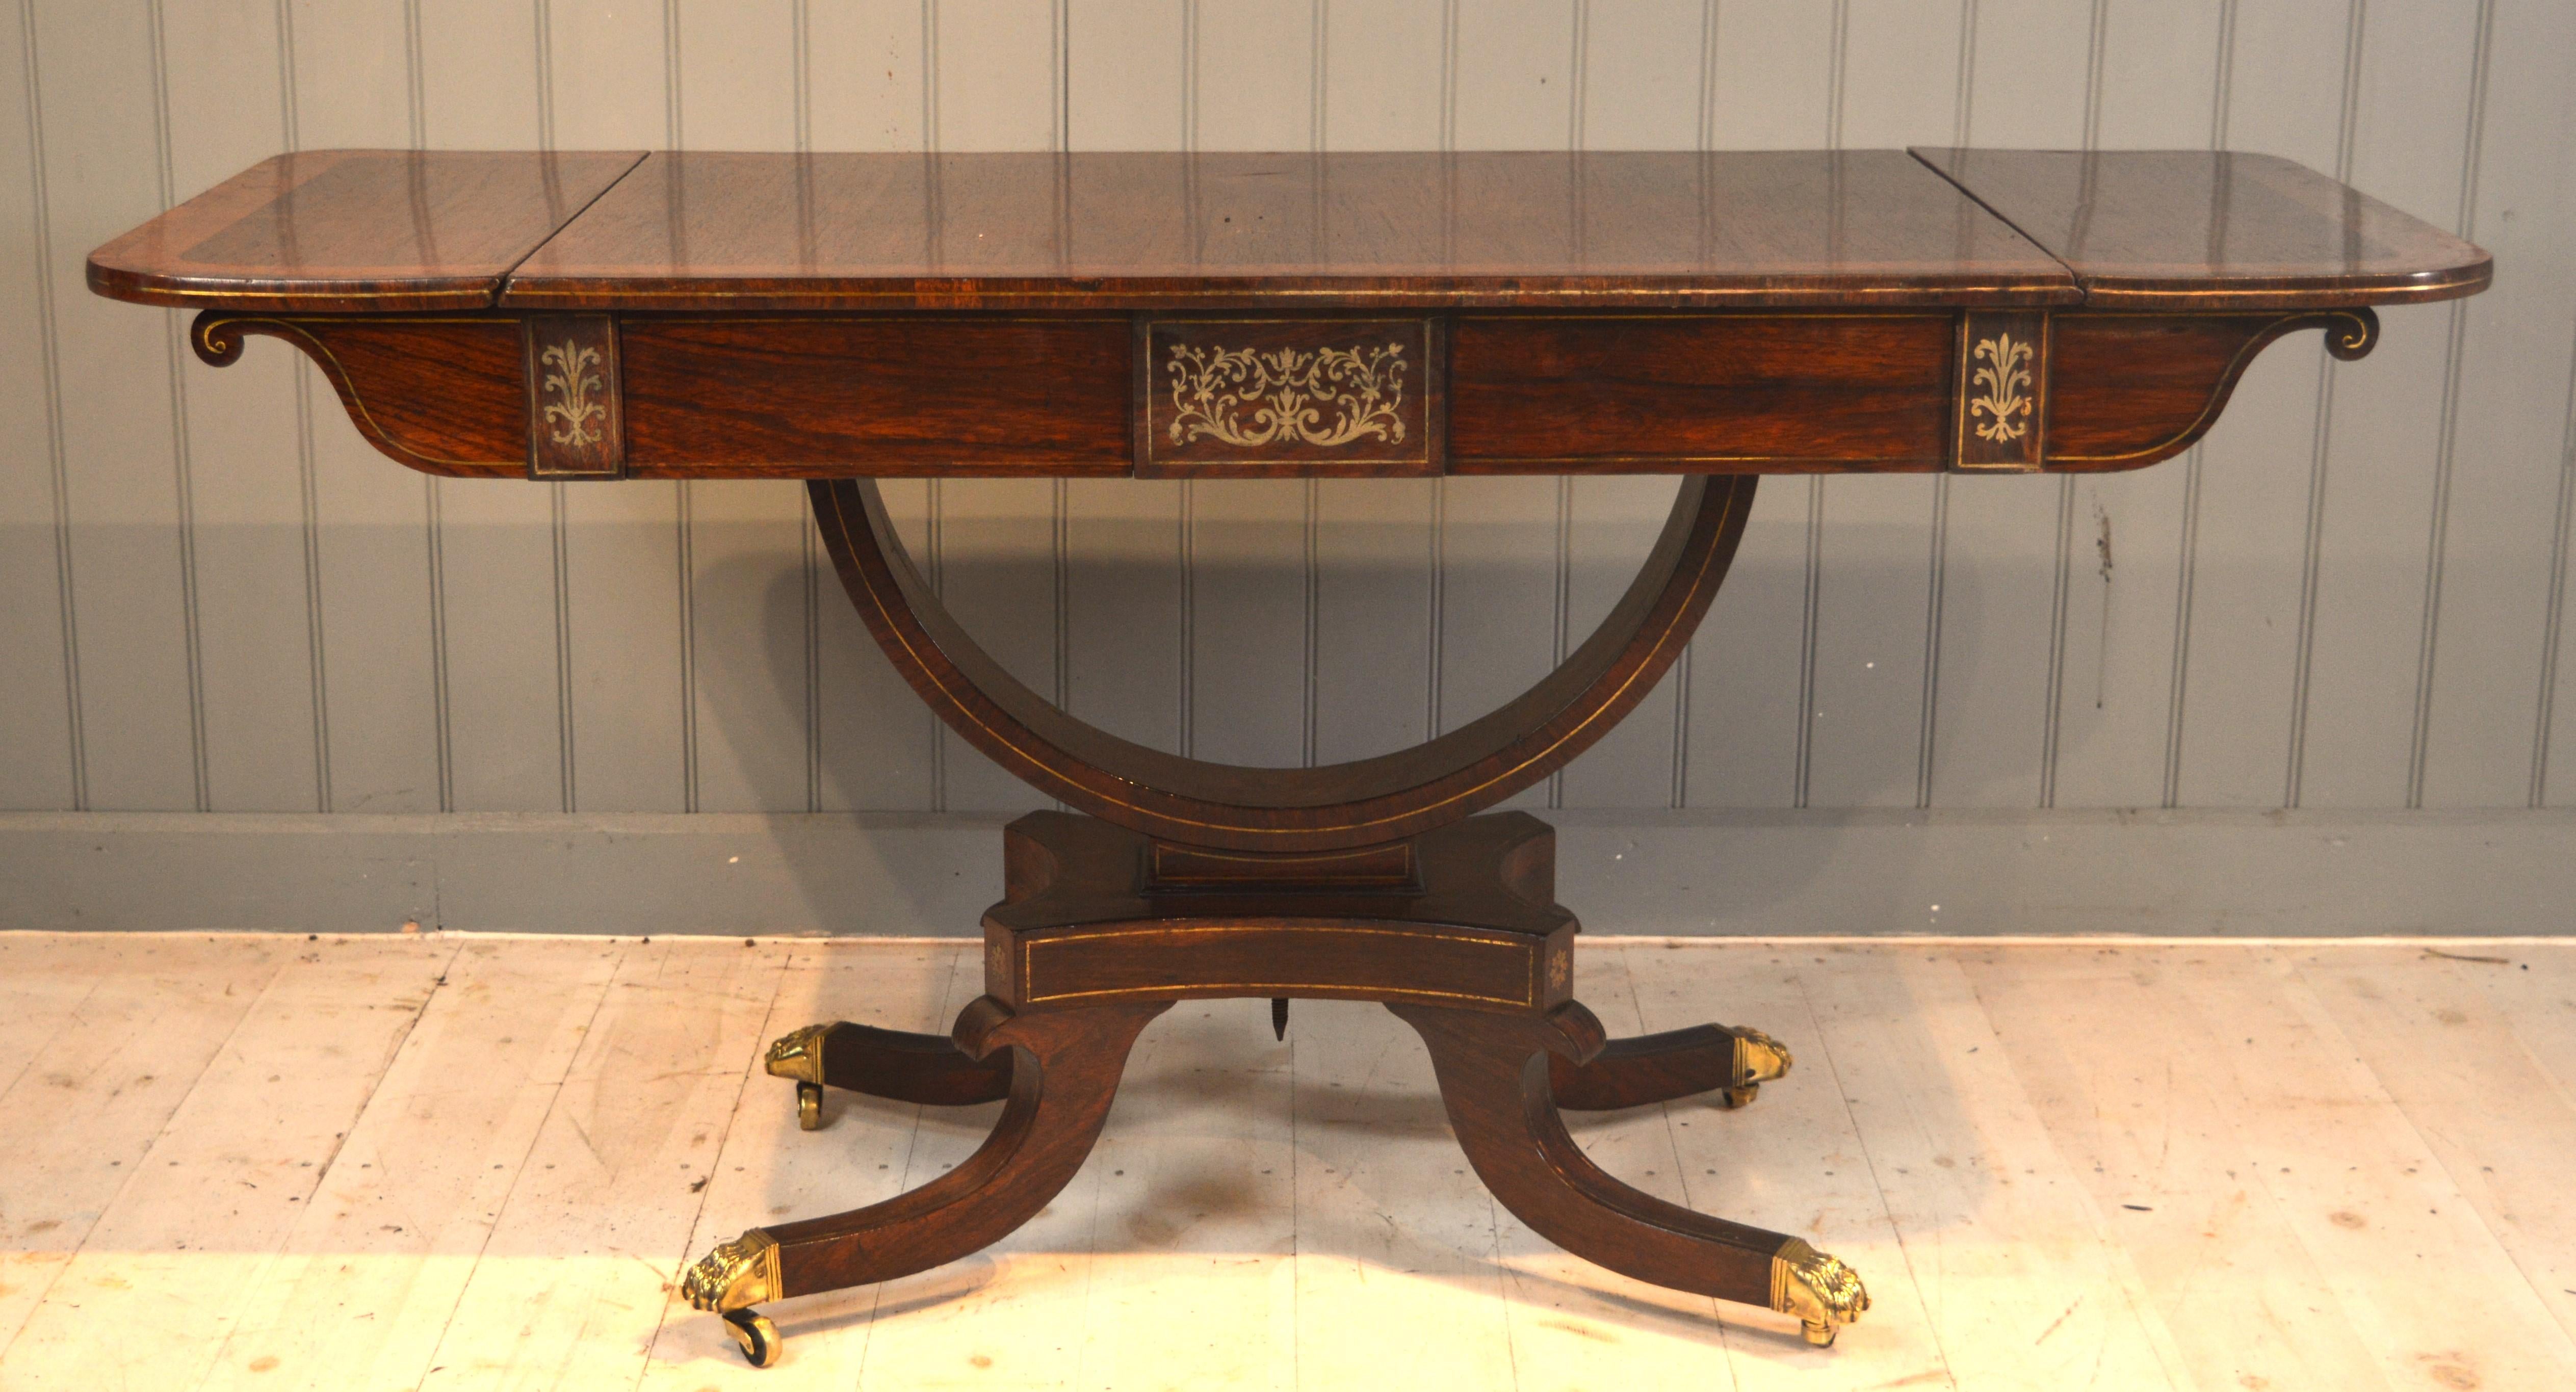 Here we have a very good quality rosewood and brass inlayed sofa table with amboyna banding in the top surface .
It also has superb brass cast feet and casters the brass inlay is top class ,tables with this type of finish were for wealthy homes in